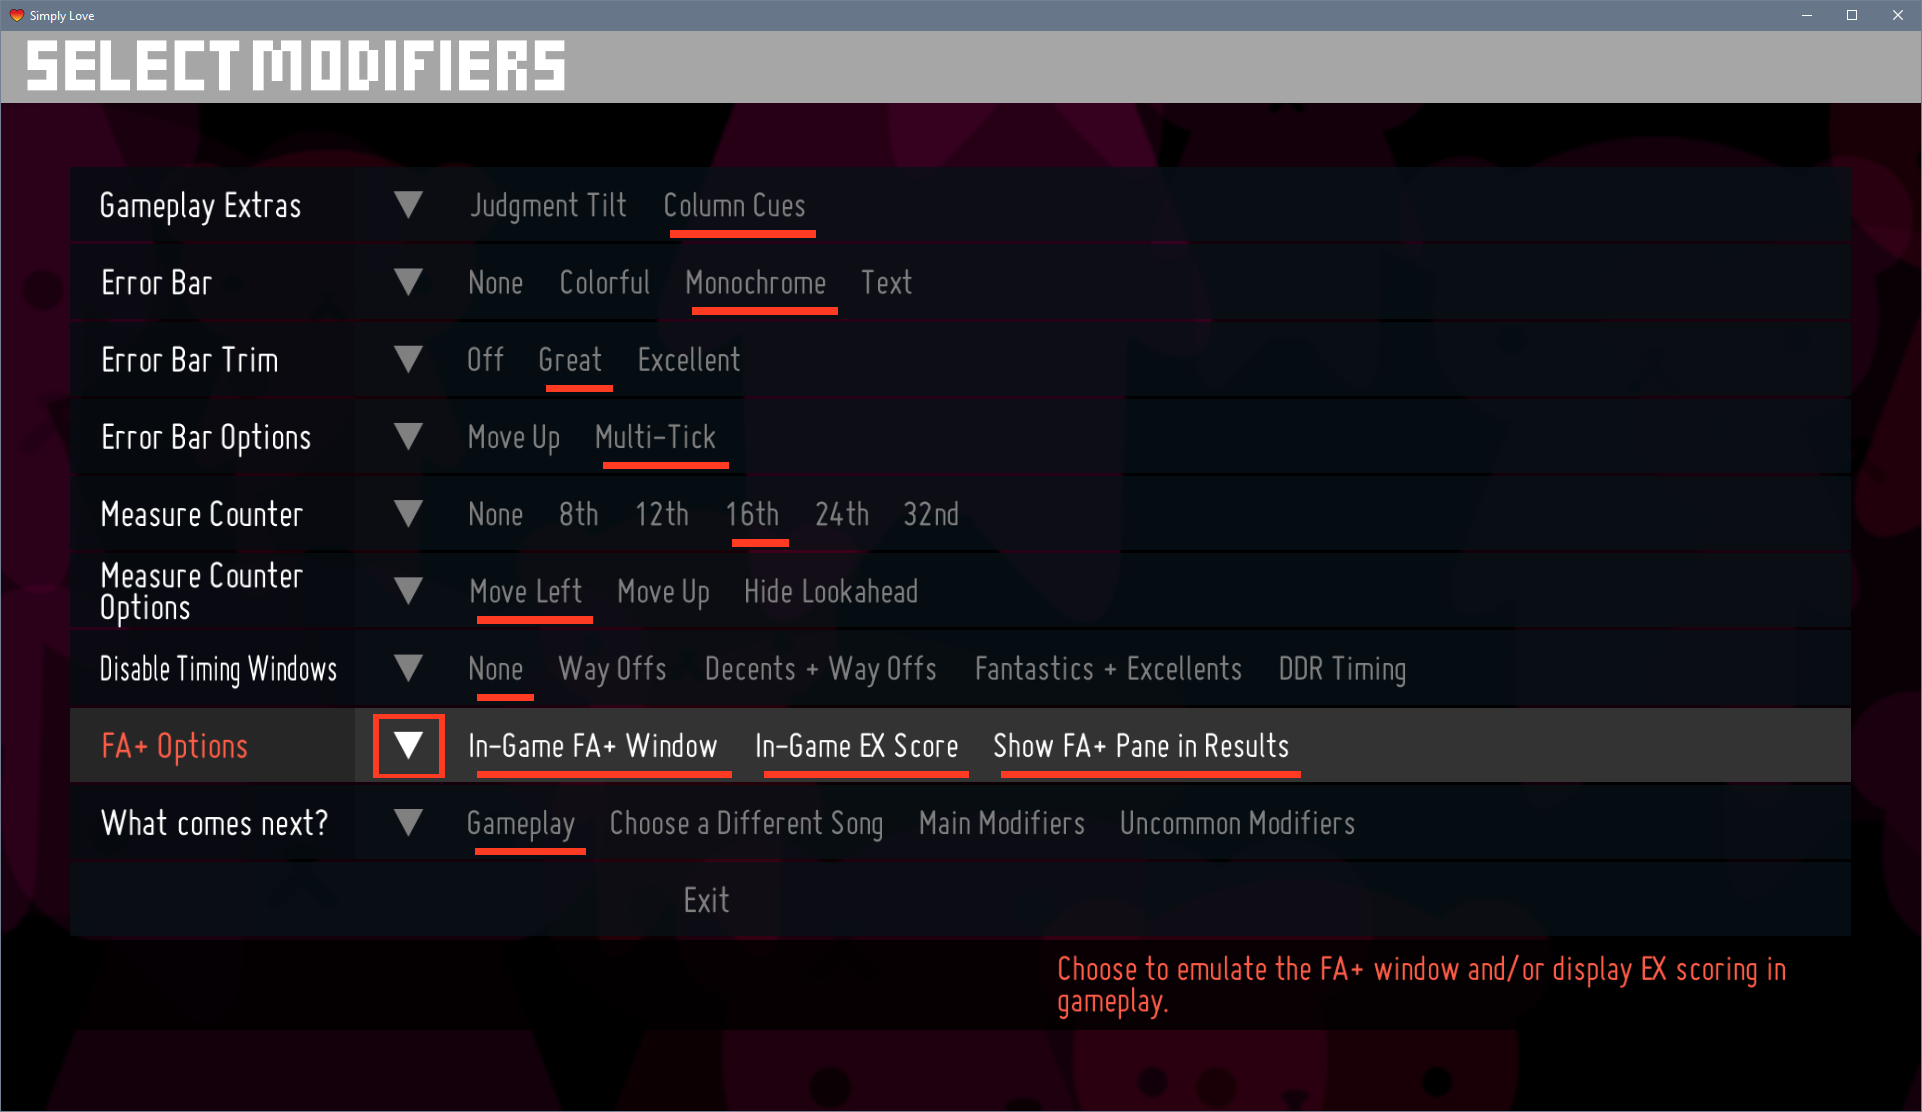 On the second page of the gameplay options, all three options in the FA+ Options category have been selected.